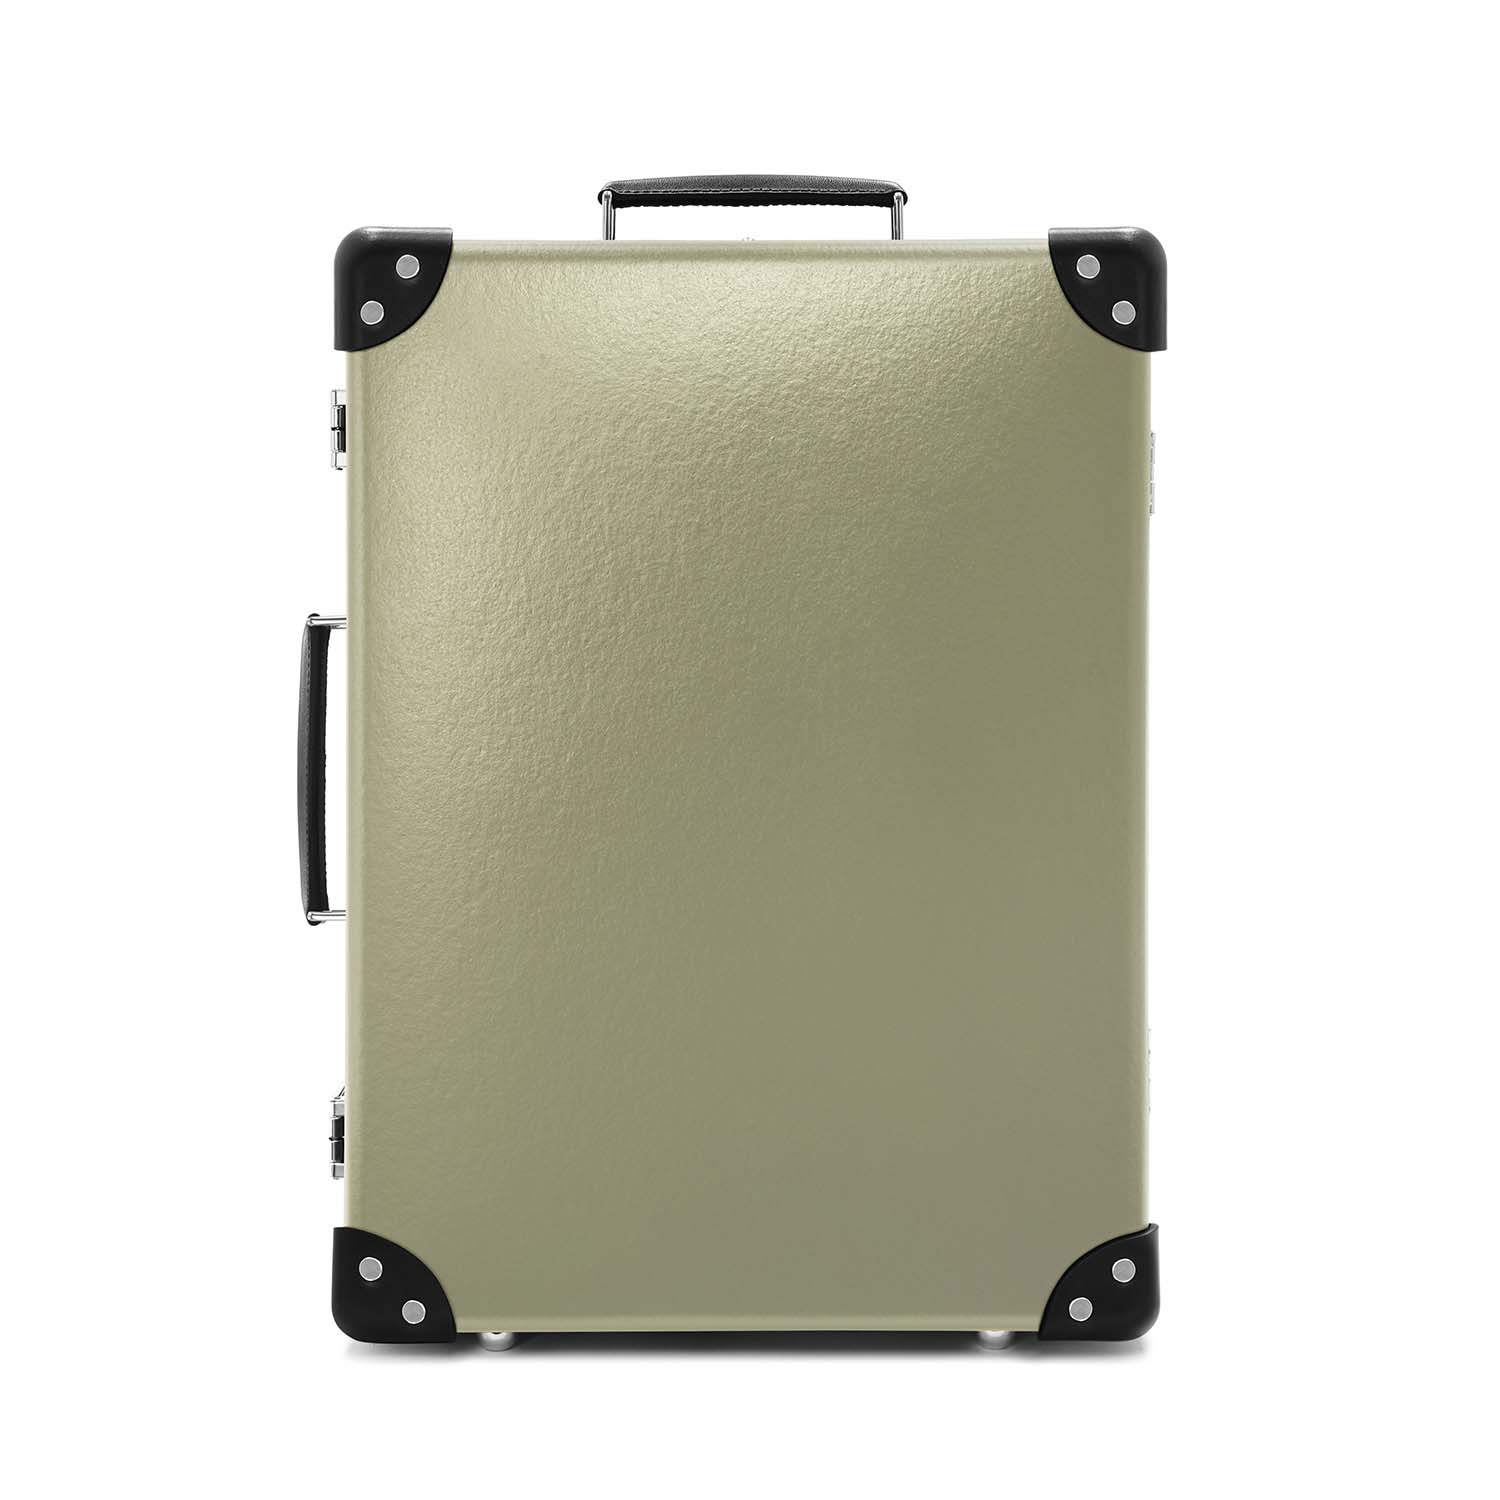 Centenary · Small Carry-On - 2 Wheels | Olive/Black/Chrome